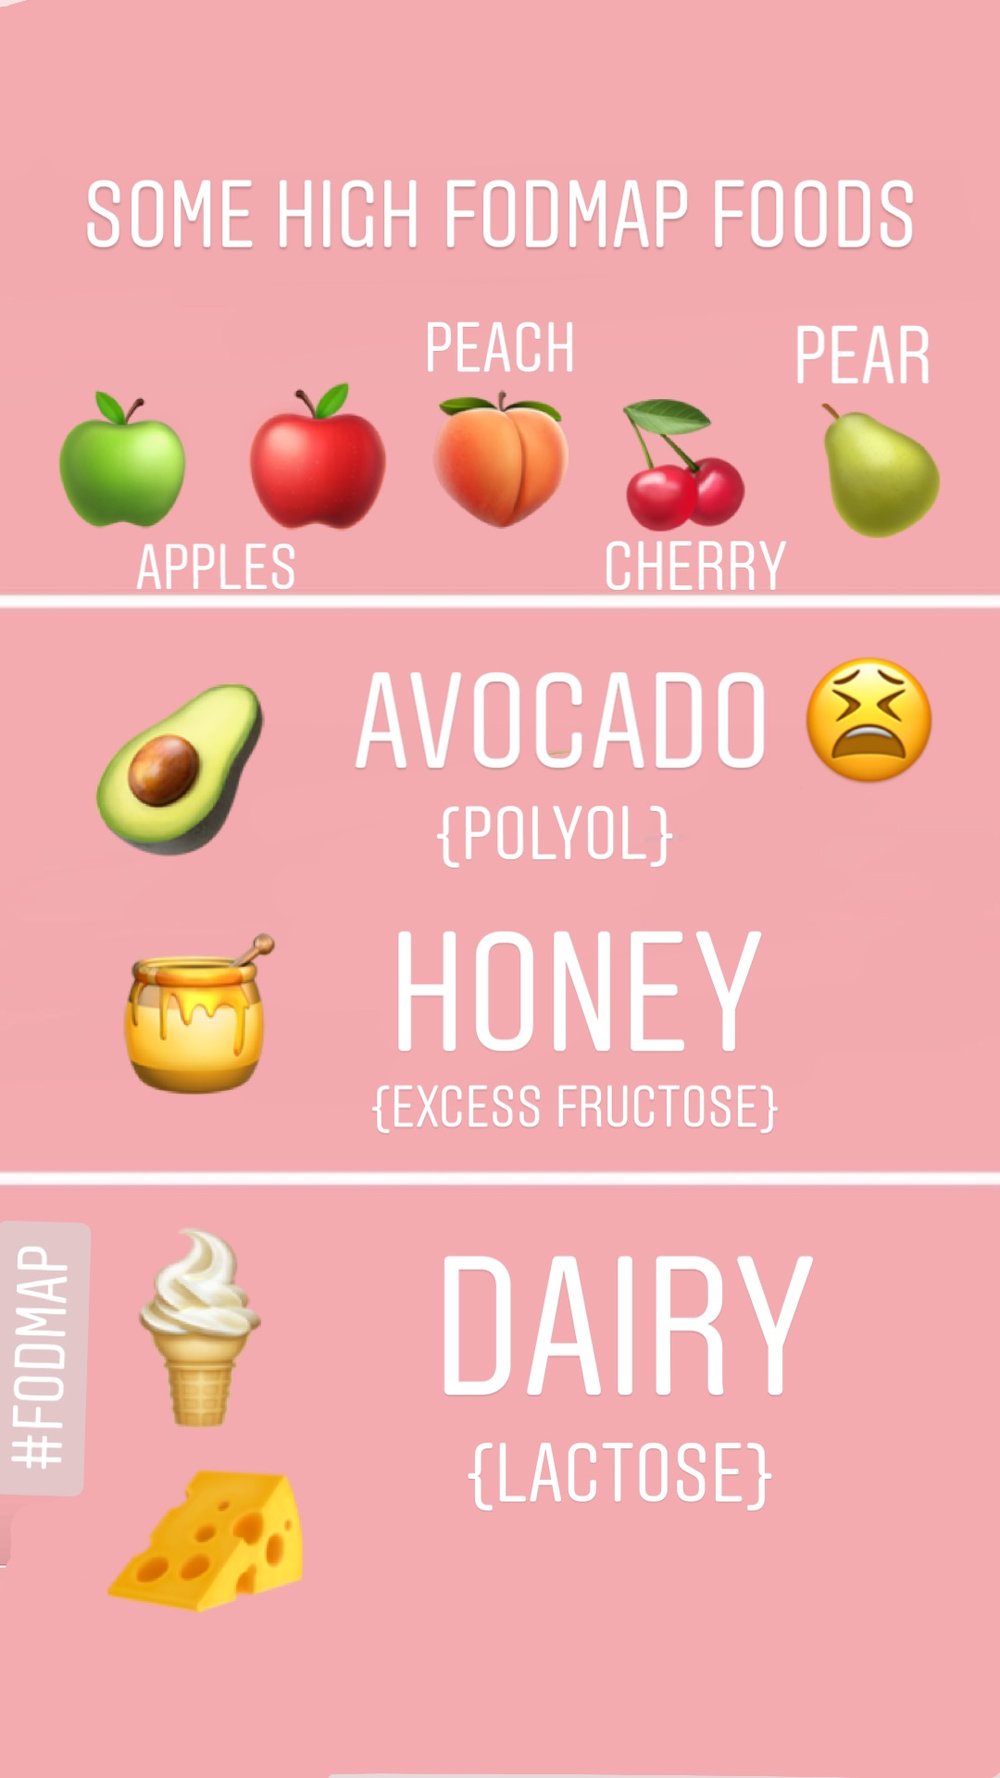 just a few of the high FODMAP foods...